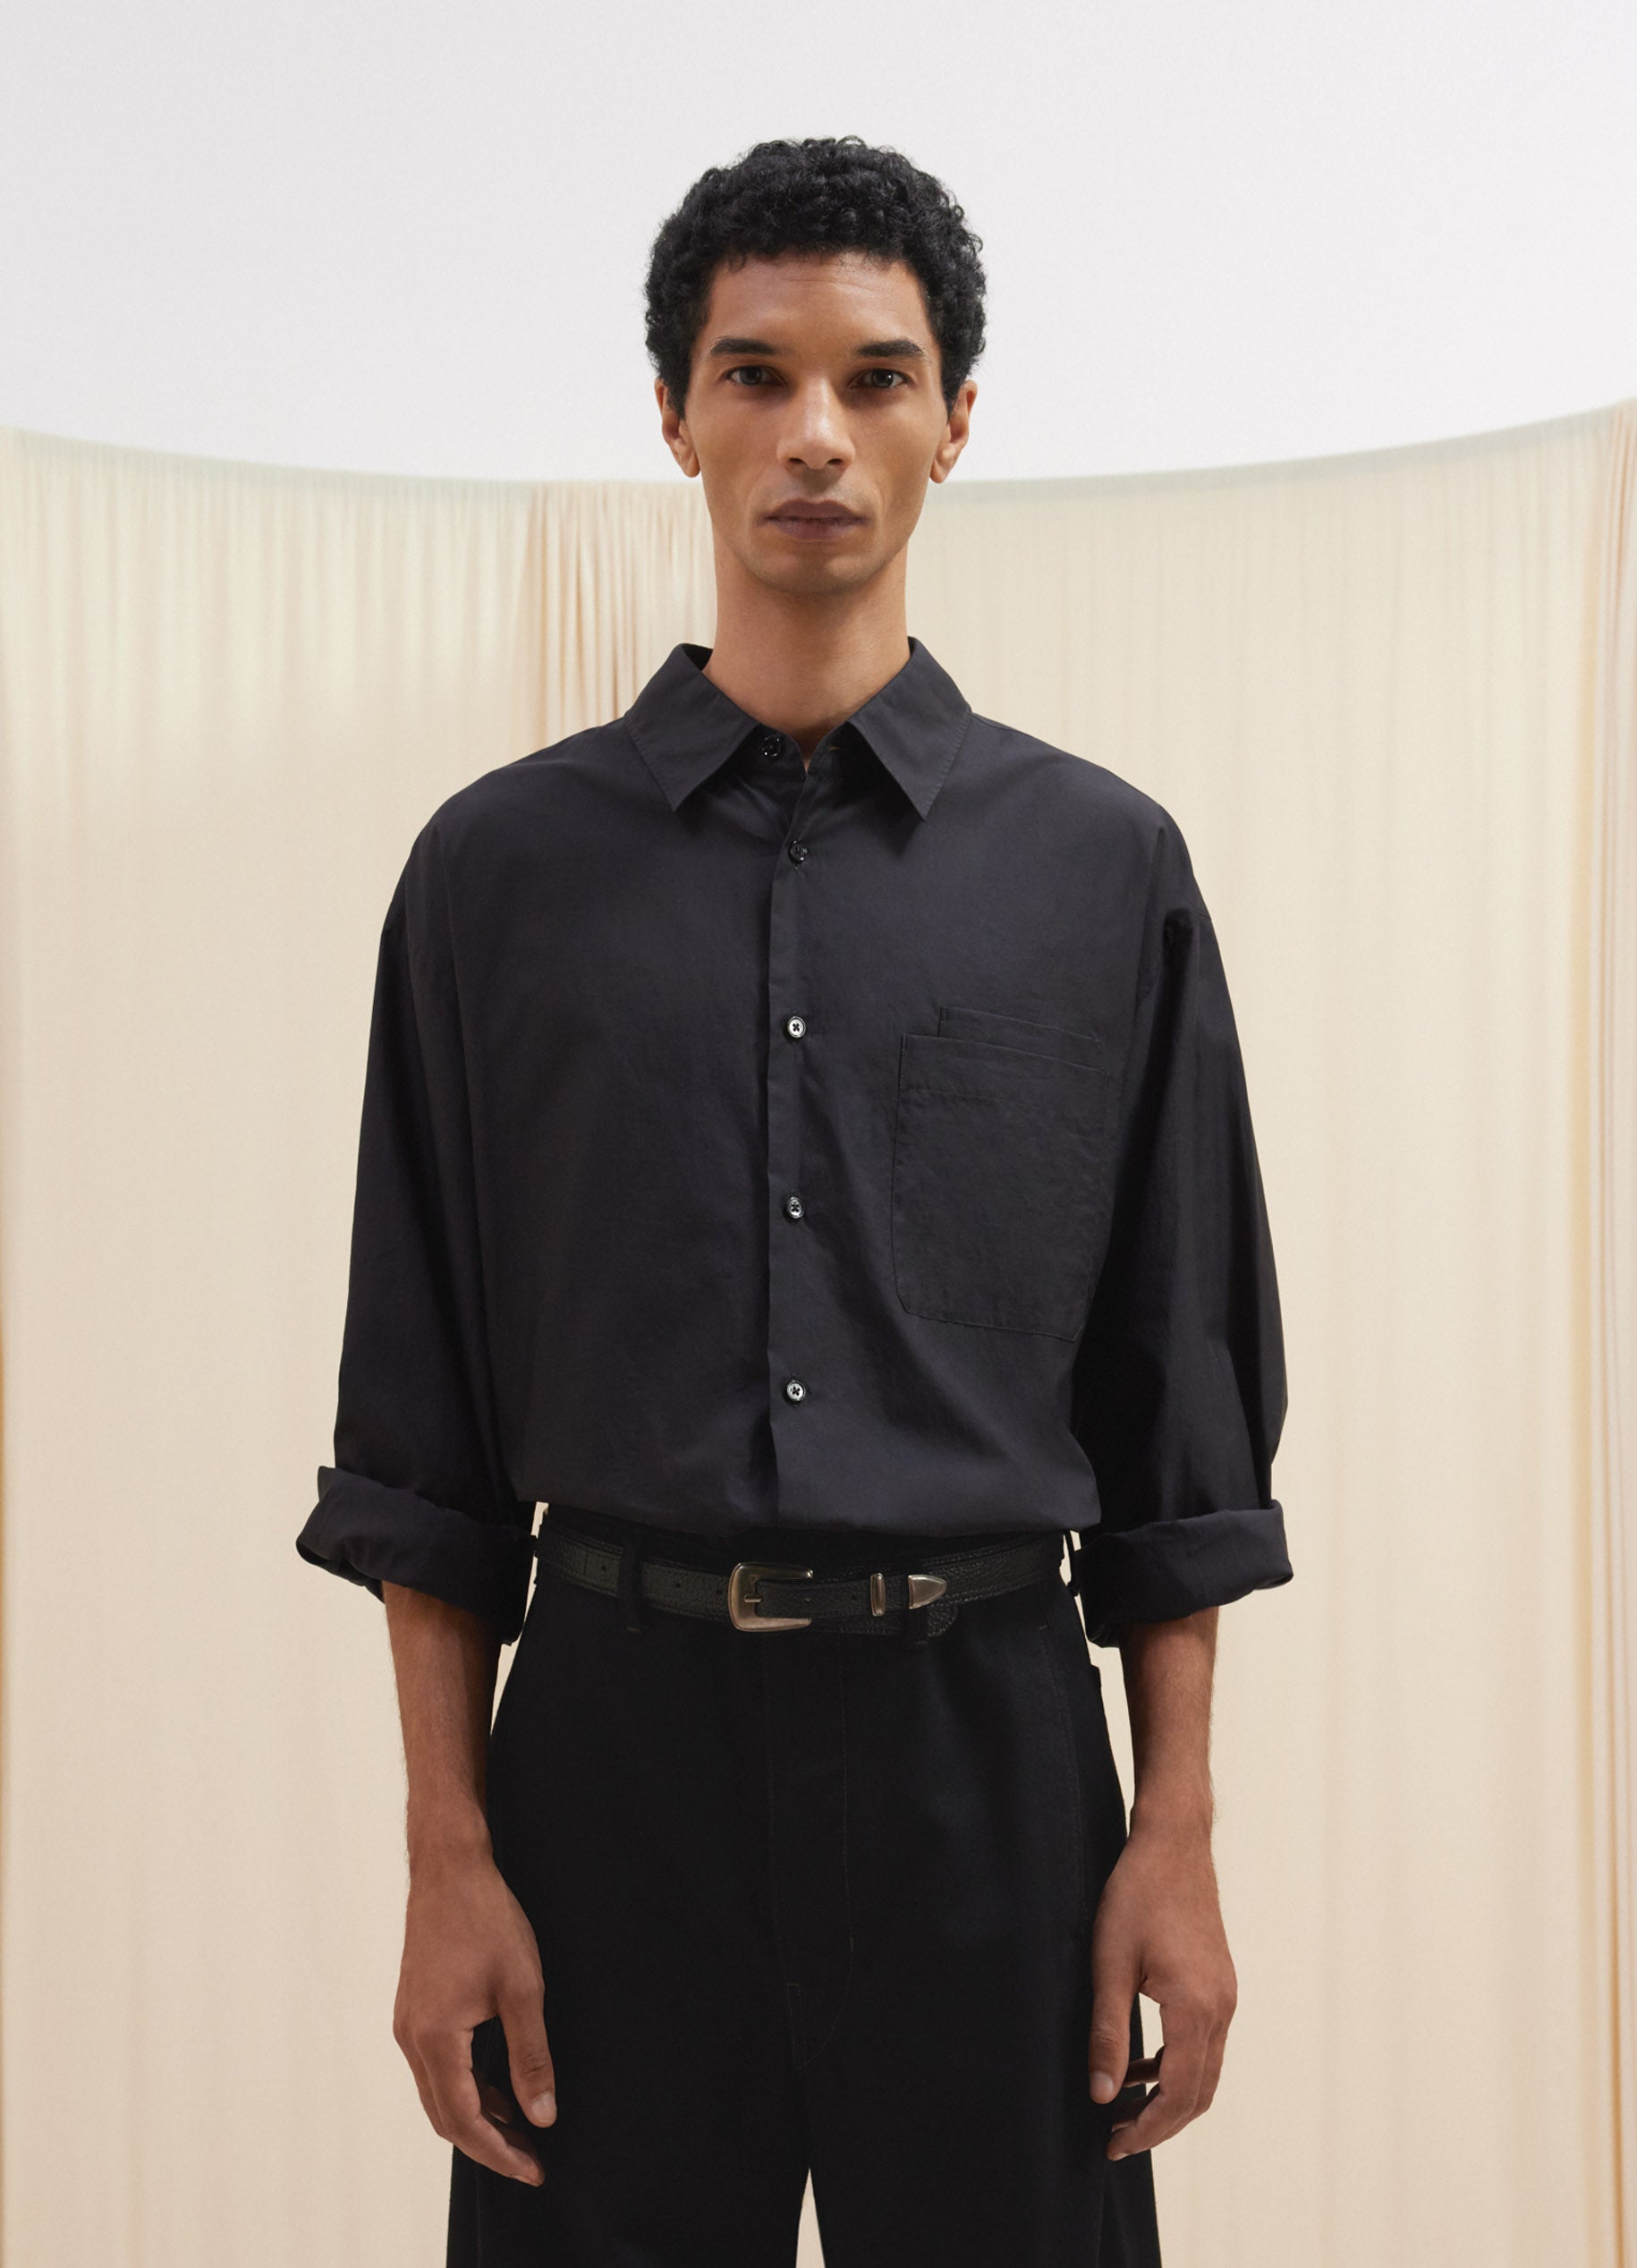 Minimal Western Belt In Black Grained Leather | LEMAIRE